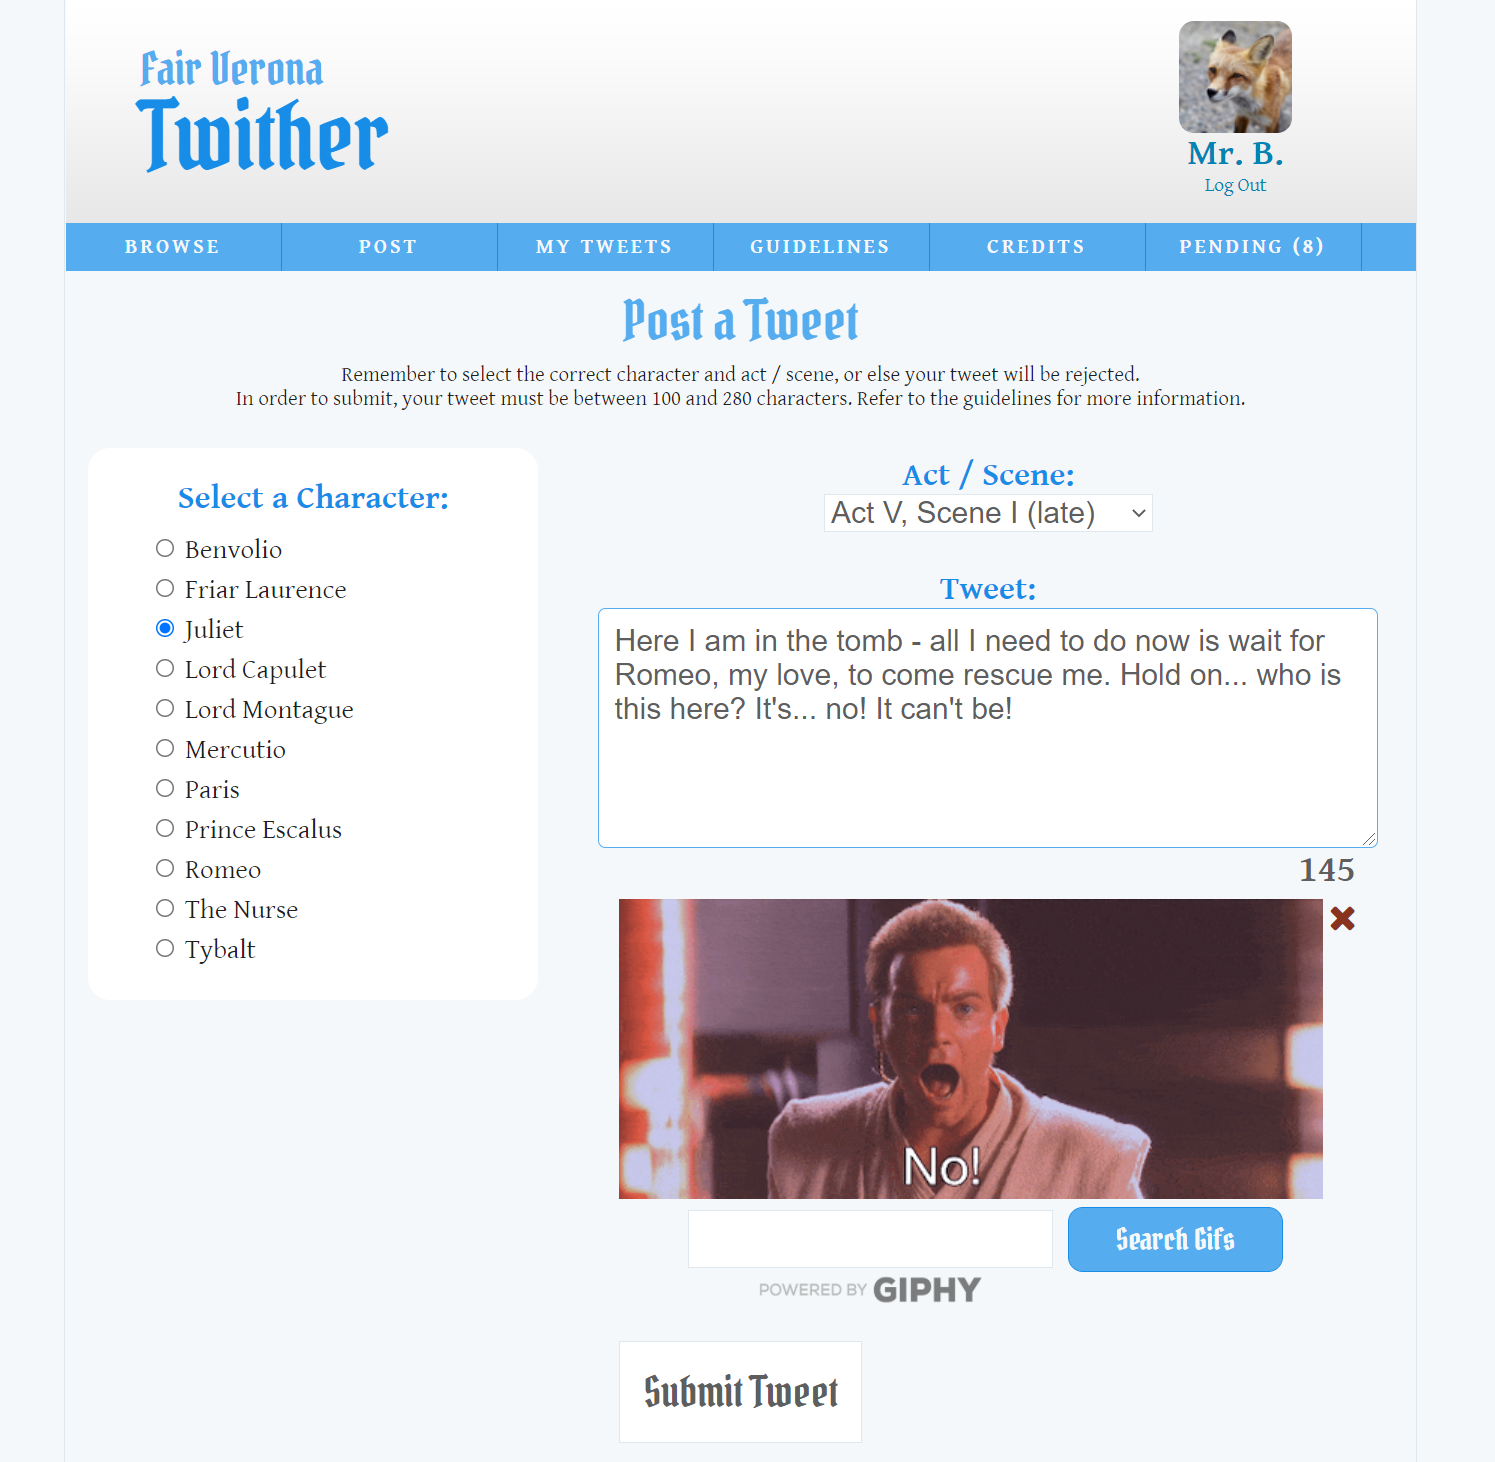 A screenshot of a Twitter-like website that was created using PHP coding.